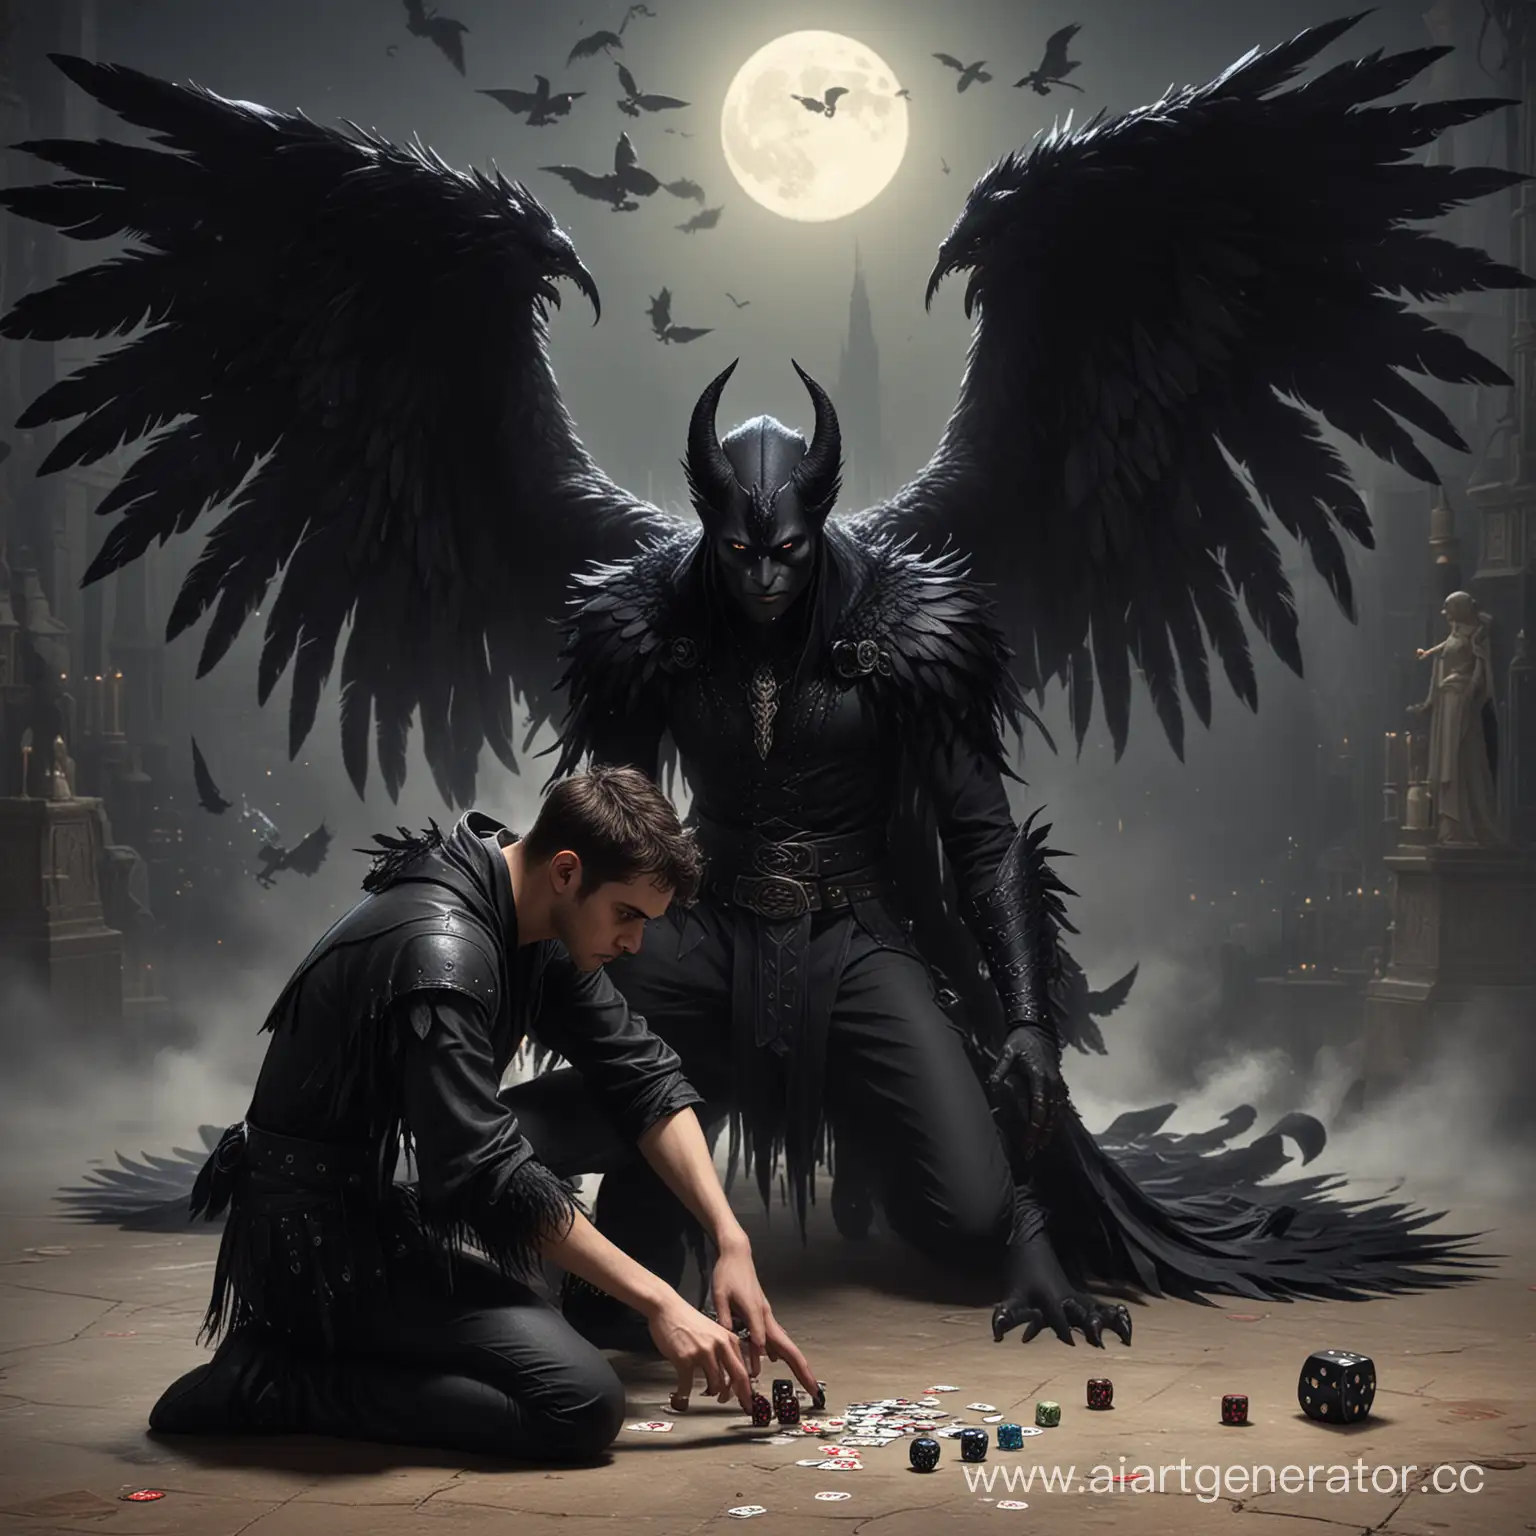 Night time. Young, male demon with black, feathered wings. Wearing thin, black clothing. Kneeling in front of a man rolling dice 